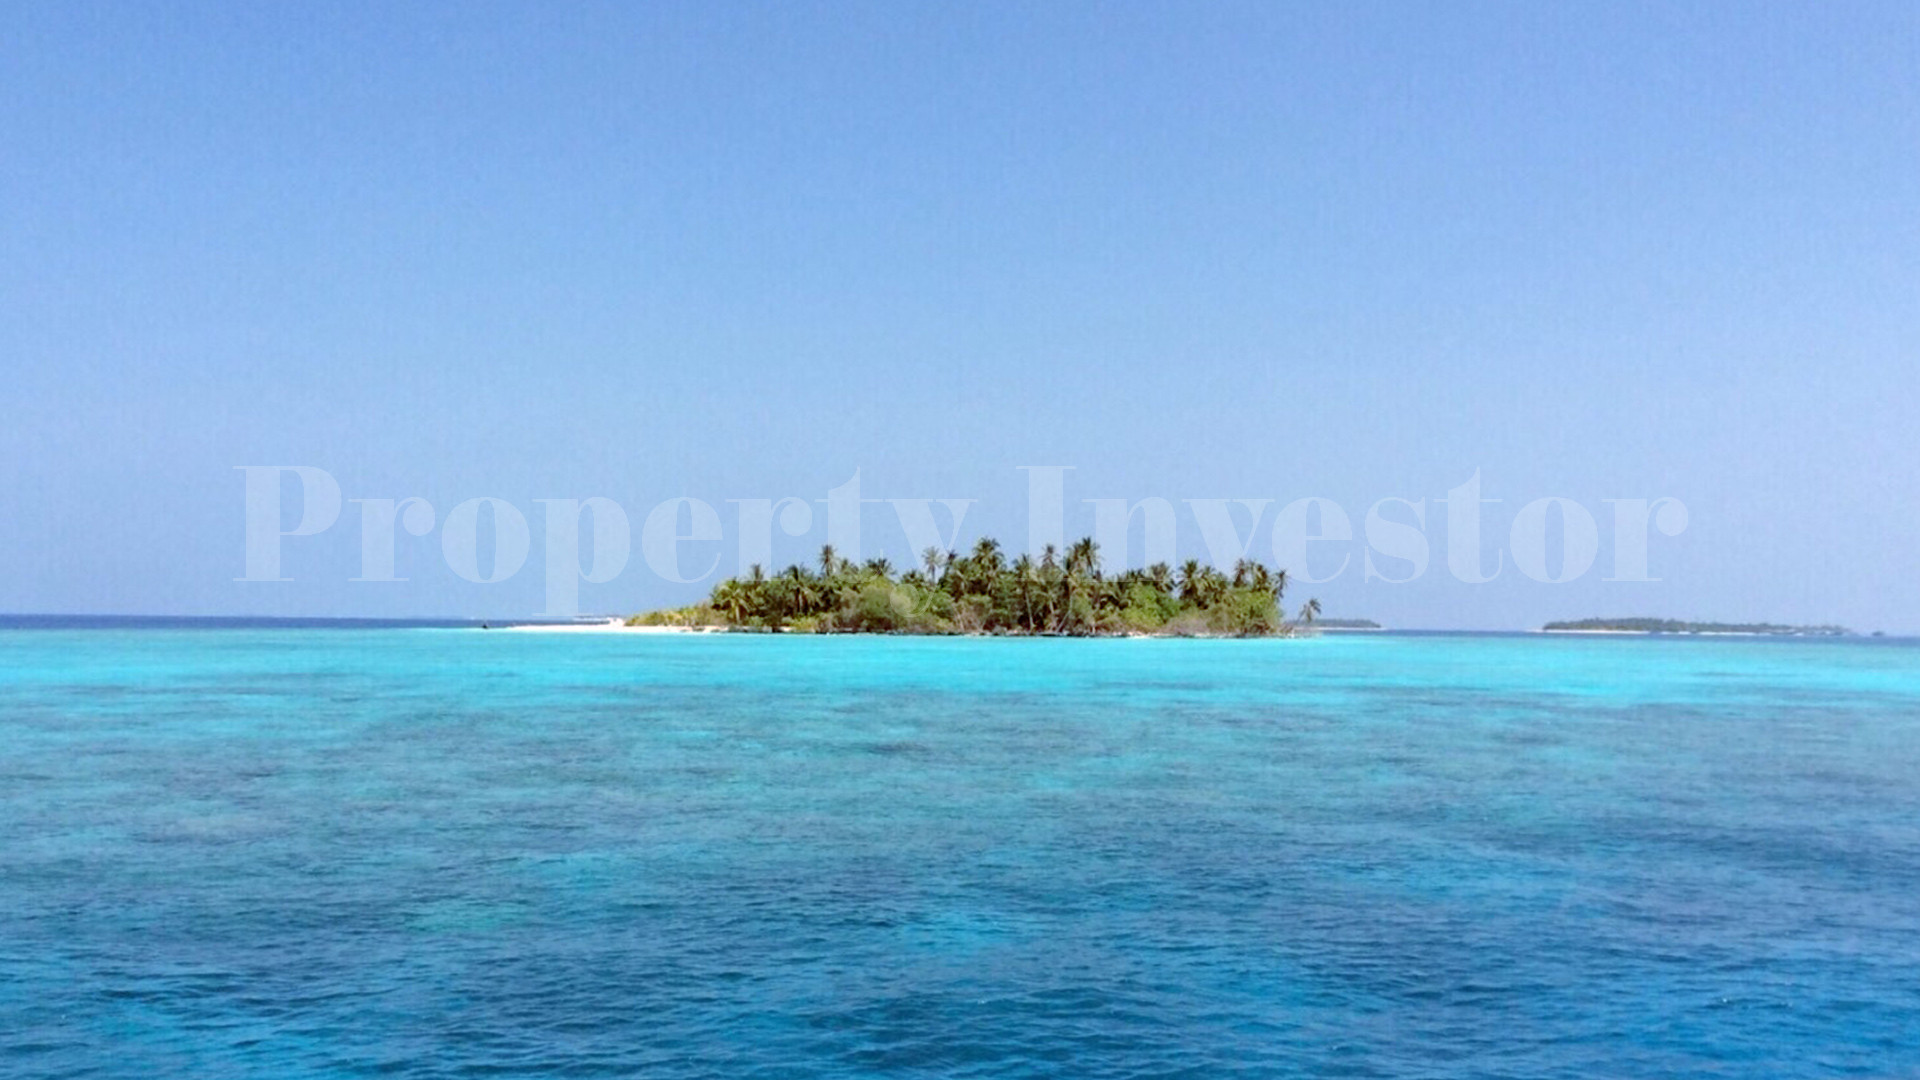 Picture Perfect 2.6 Hectare Virgin Island Approved for Commercial Development for Sale in the Maldives